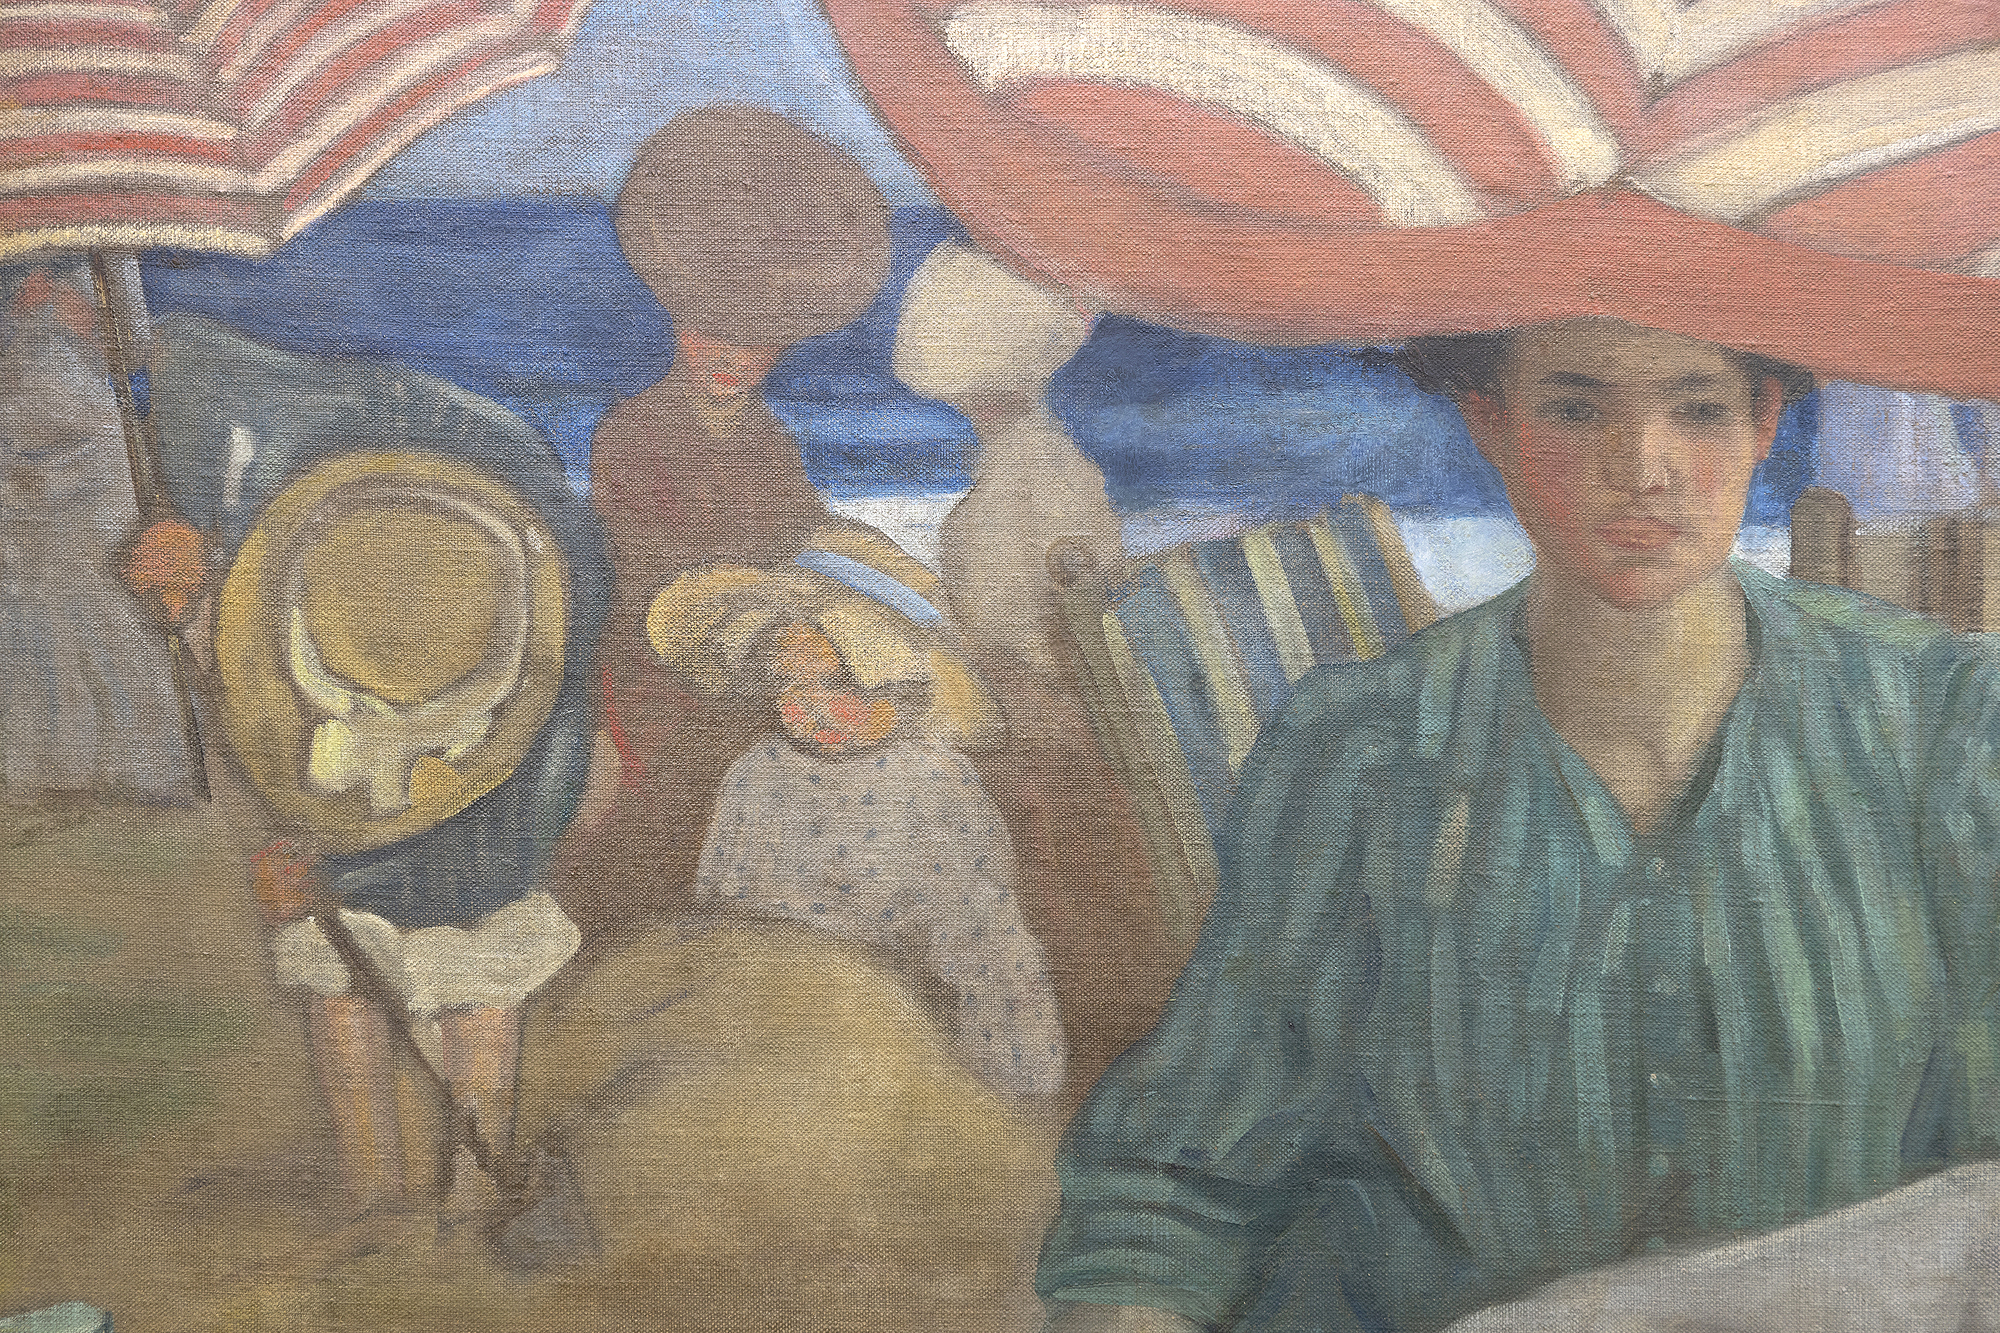 Frederick Frieseke is often regarded as the finest American Impressionist painter of the figure. Yet when he came to study at Académie Juilian in 1898, several les Nabis painters remained a lingering presence, and it was the rich, decorative patterns of Edouard Vuillard and Pierre Bonnard that served as the blueprint for his early success. That influence is clearly demonstrated in the unrestrained repetition of the voluminous, pleated, striped umbrellas of Afternoon at the Beach, a canvas mural installed in the opulent Hotel Shelburne dining room overlooking the Atlantic City Boardwalk. The unifying impact of that repetitive element imbues the setting with cloud-like loft within a color scheme, evoking Vuillard and the richness of a Gobelin tapestry, rather than the effect of sunlight and broken color that mark his more familiar paintings from the decade of 1910 to 1920.&lt;br&gt;&lt;br&gt;Afternoon at the Beach was installed under the artist’s direction in February 1906. It remained on view for decades at the swanky hotel that enticed “Diamond Jim” James Buchanan Brady to pay one thousand dollars a week for permanent residence and was an unfading memory for throngs of well-heeled socialites, financiers, and notables from Irving Berlin to John Philip Sousa and Ethel Barrymore to Al Jolson. Undoubtedly, its presence high on the grand dining room wall contributed to the artist’s popularity and renown.&lt;br&gt;&lt;br&gt;Today, we may look upon this long, frieze-like composition as a delightful fin-de-siécle costume study or an informative expose of Victorian mores as suggested by the separate spheres of gender groupings. But mostly, Afternoon at the Beachrecounts the artist’s unbridled delight and appreciation of women, here, expressed within familial, maternal, and social contexts. It is the subject and theme that brought Frieseke acclaim and awards on both sides of the Atlantic and which, to this day, endears him to the many who count him among the most beloved of American figurative painters.